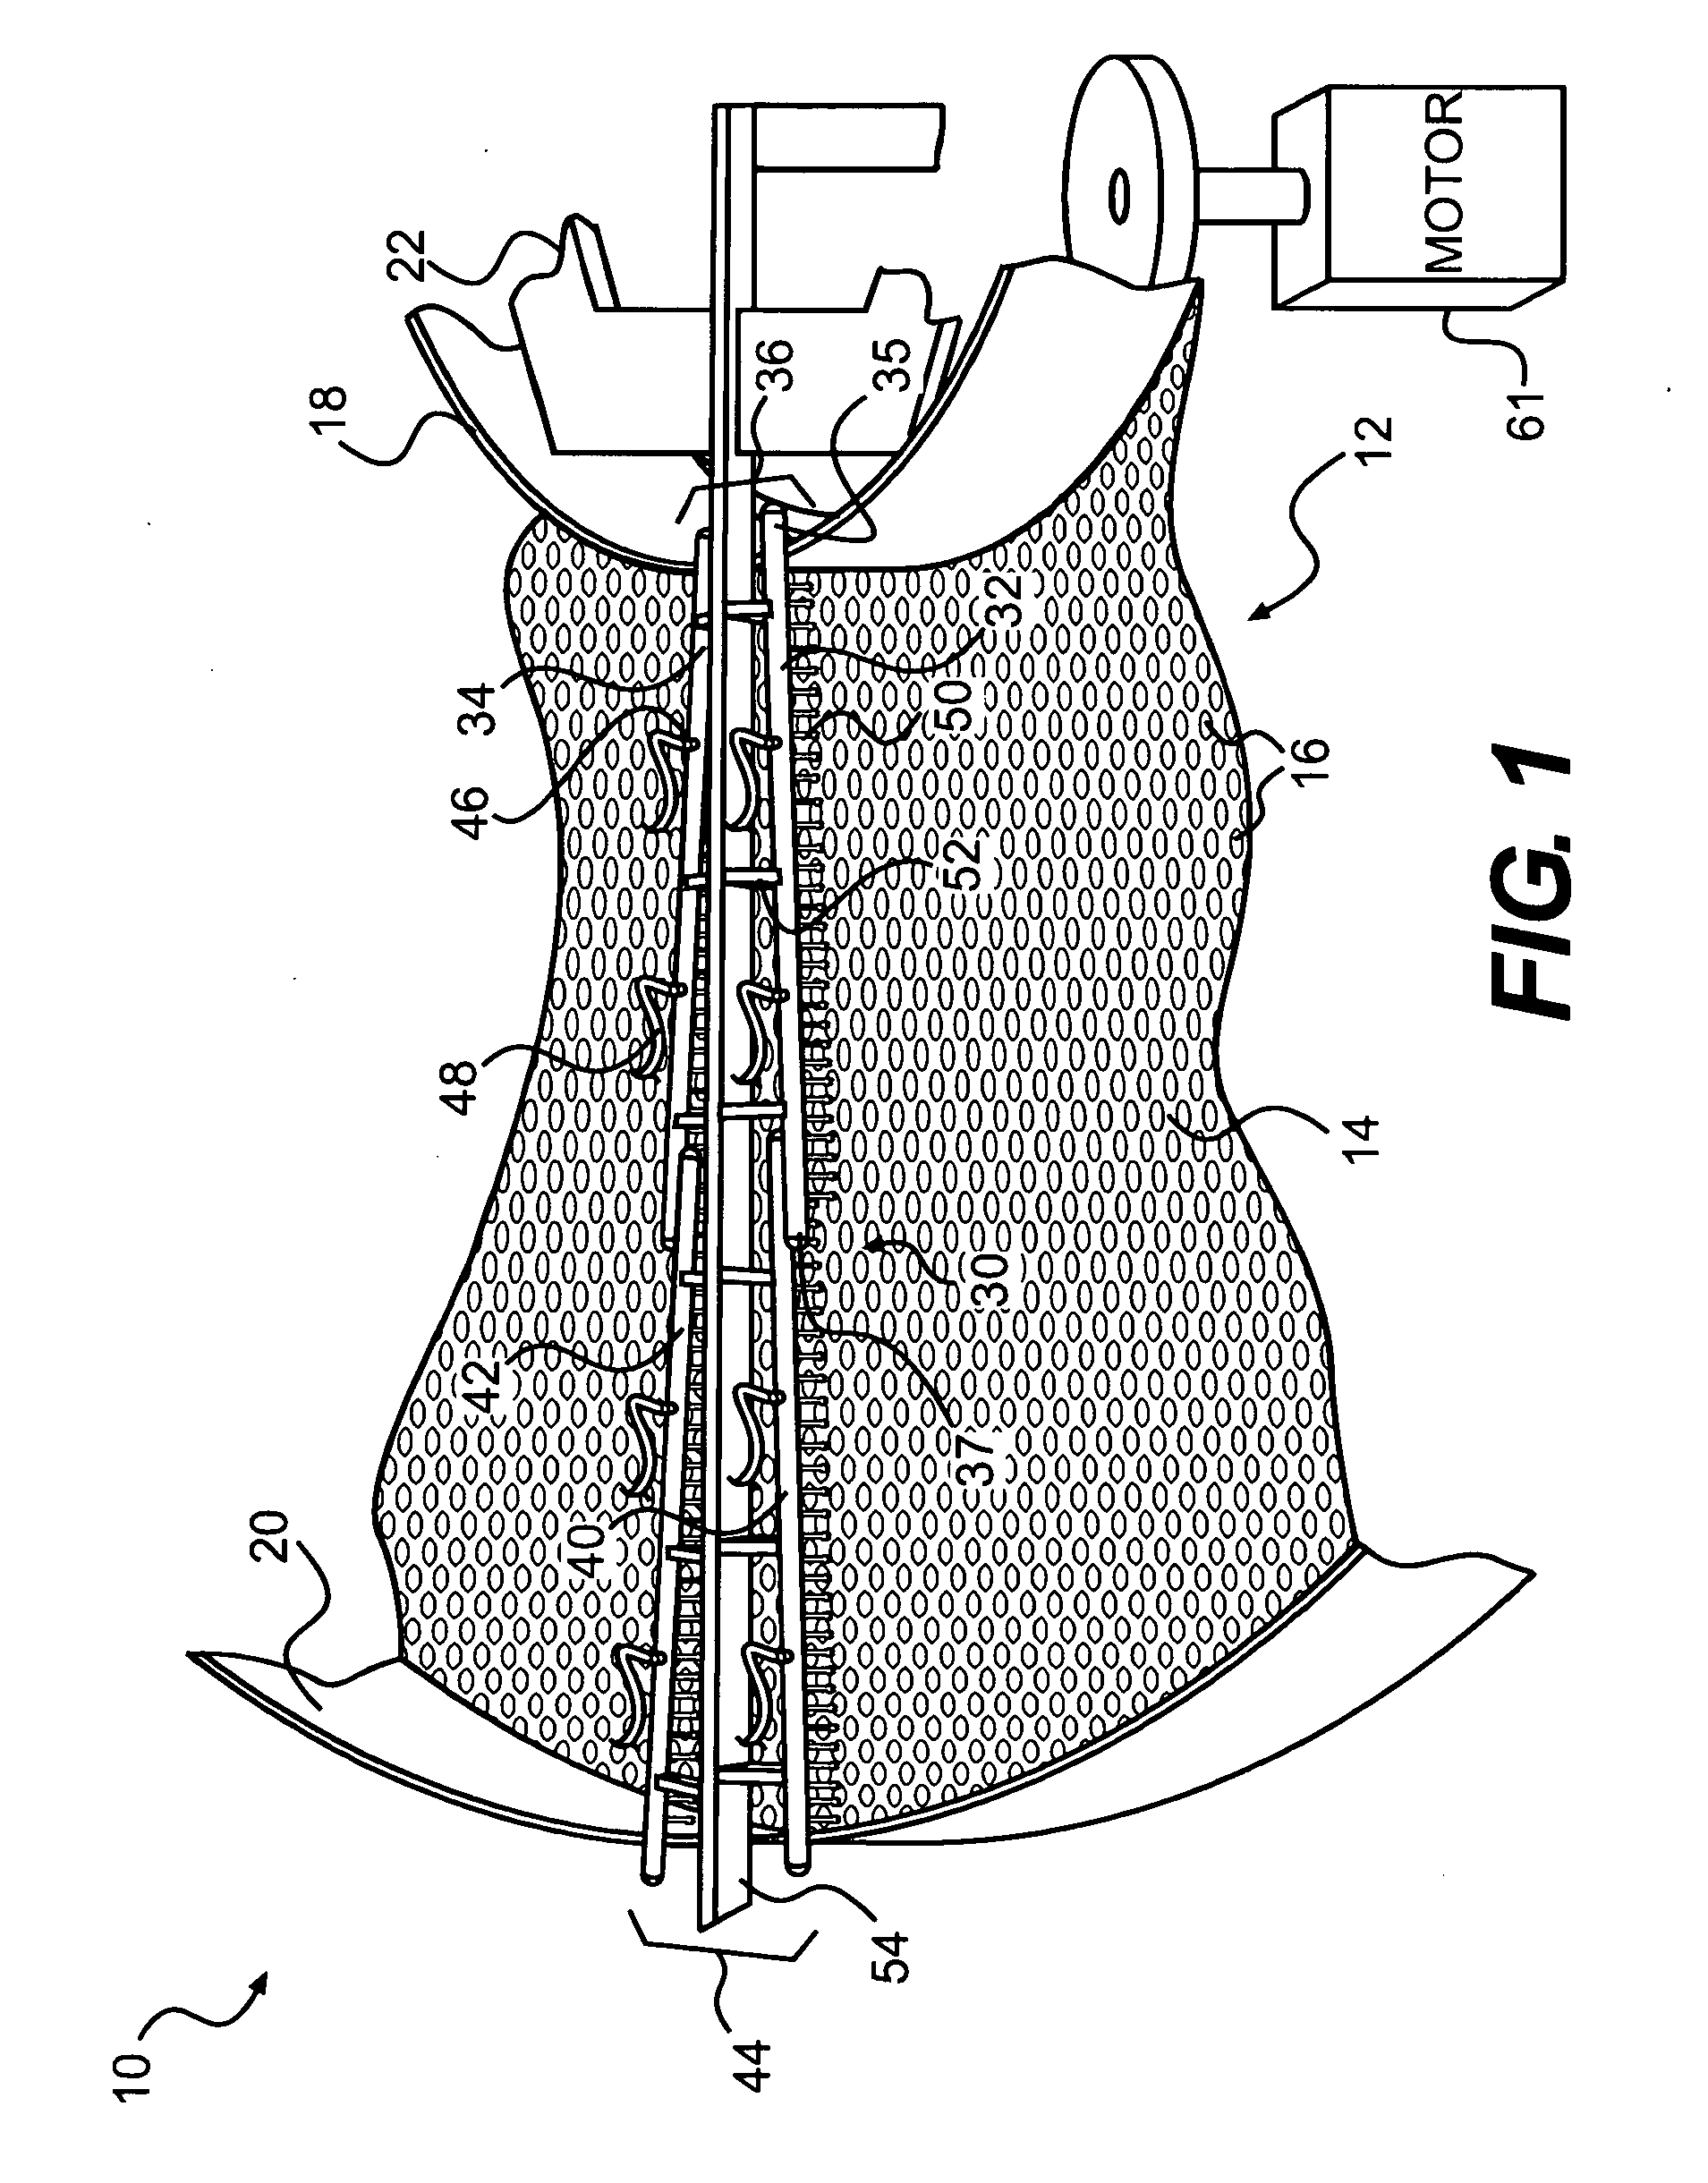 Method of filtering phosphate utilizing a rotary table filter or horizontal table filter